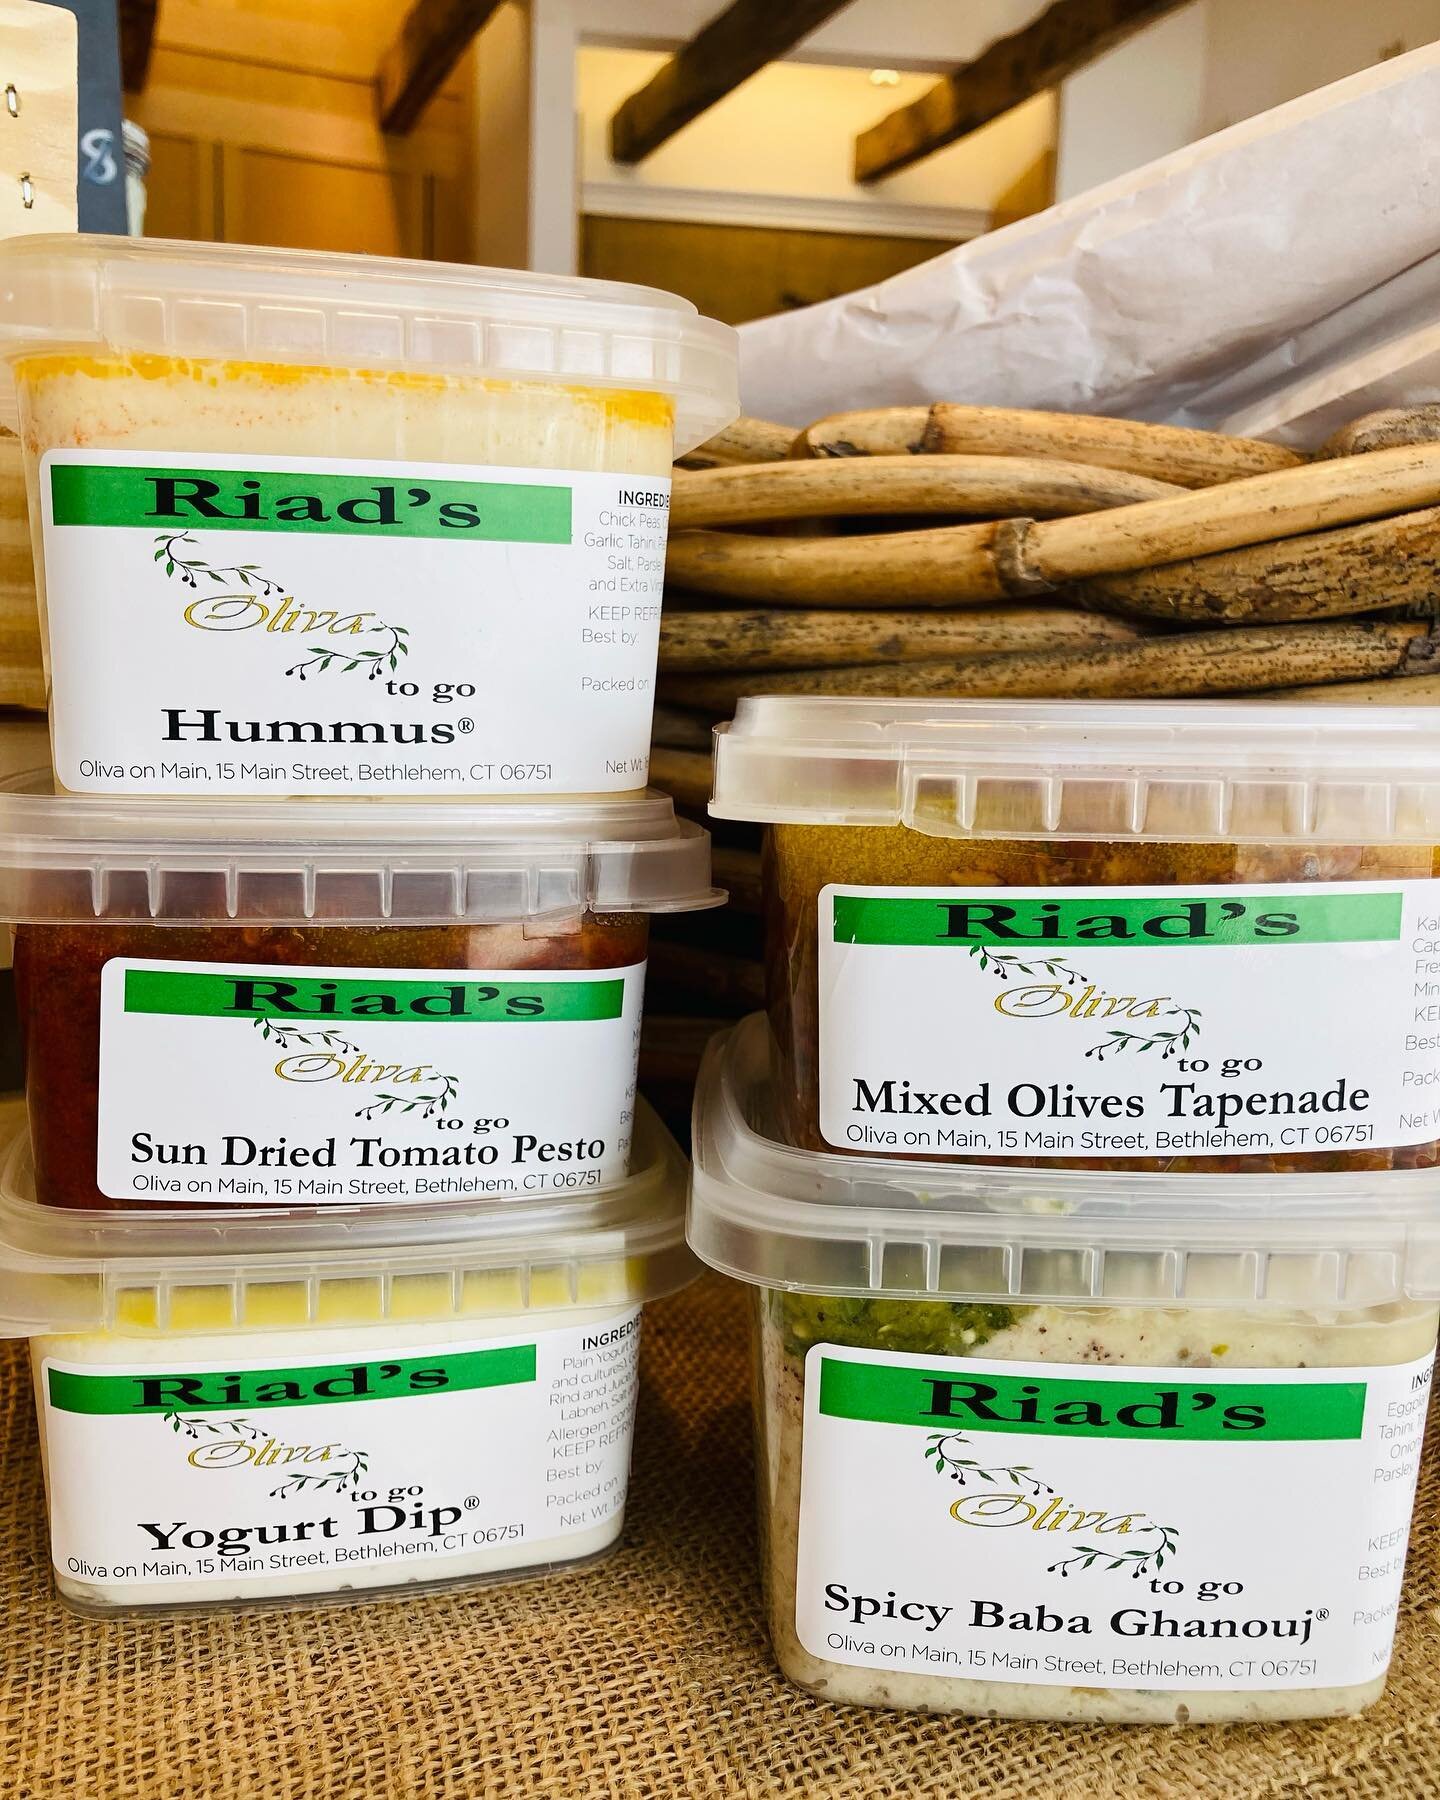 Join us Sunday April 10 from 12-1 pm when we welcome Riad, the chef from Oliva on Main in Bethlehem, CT for a tasting of the amazing dips, spreads and pestos he creates! 

We will now be carrying them in the market! 

#shoplocalct #dips #olives #humm